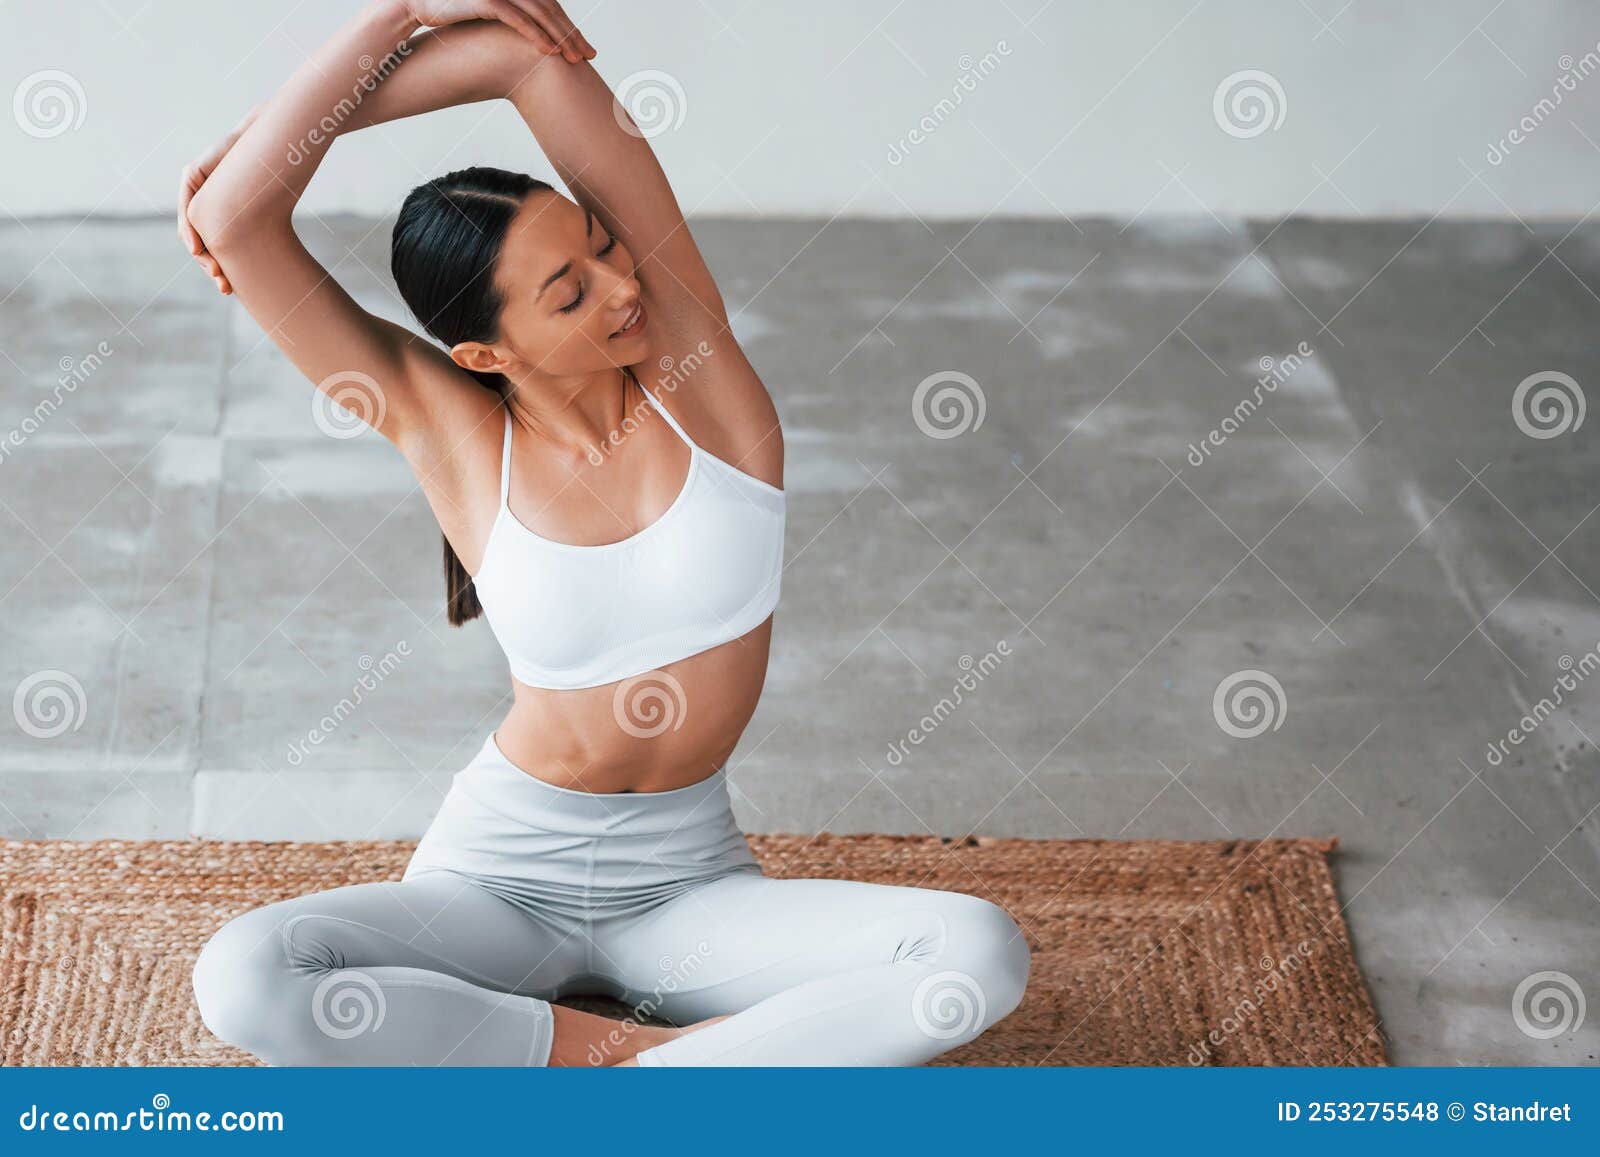 Sits on yoga mat. Woman with sportive slim body type in underwear